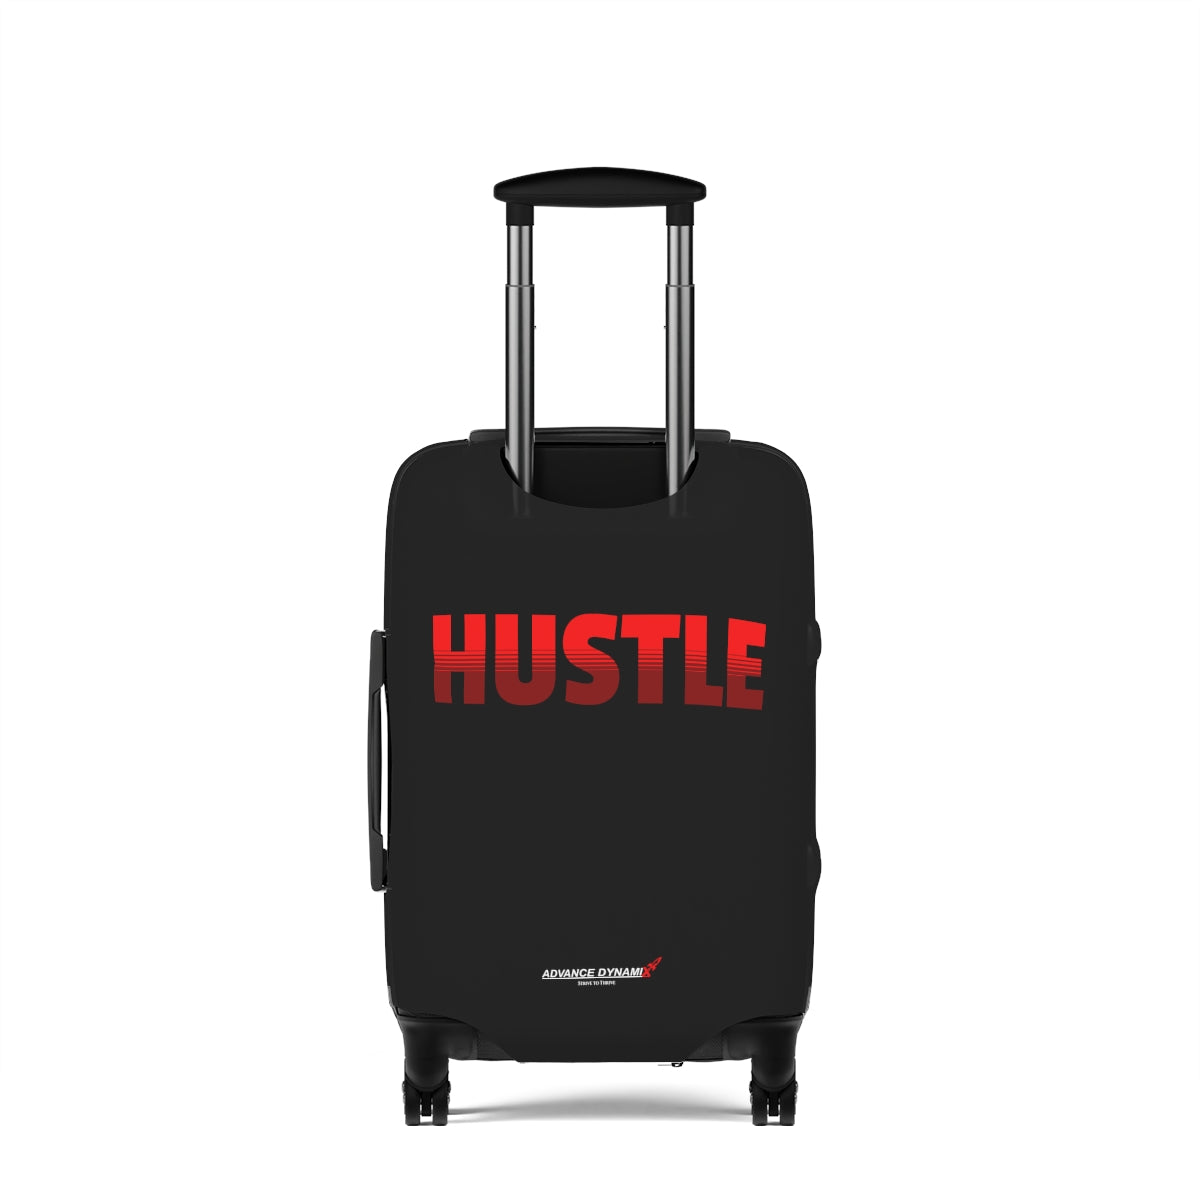 HUSTLE - Luggage Covers Infused with Advance Dynamix Add-A-Tude - Tell the world!